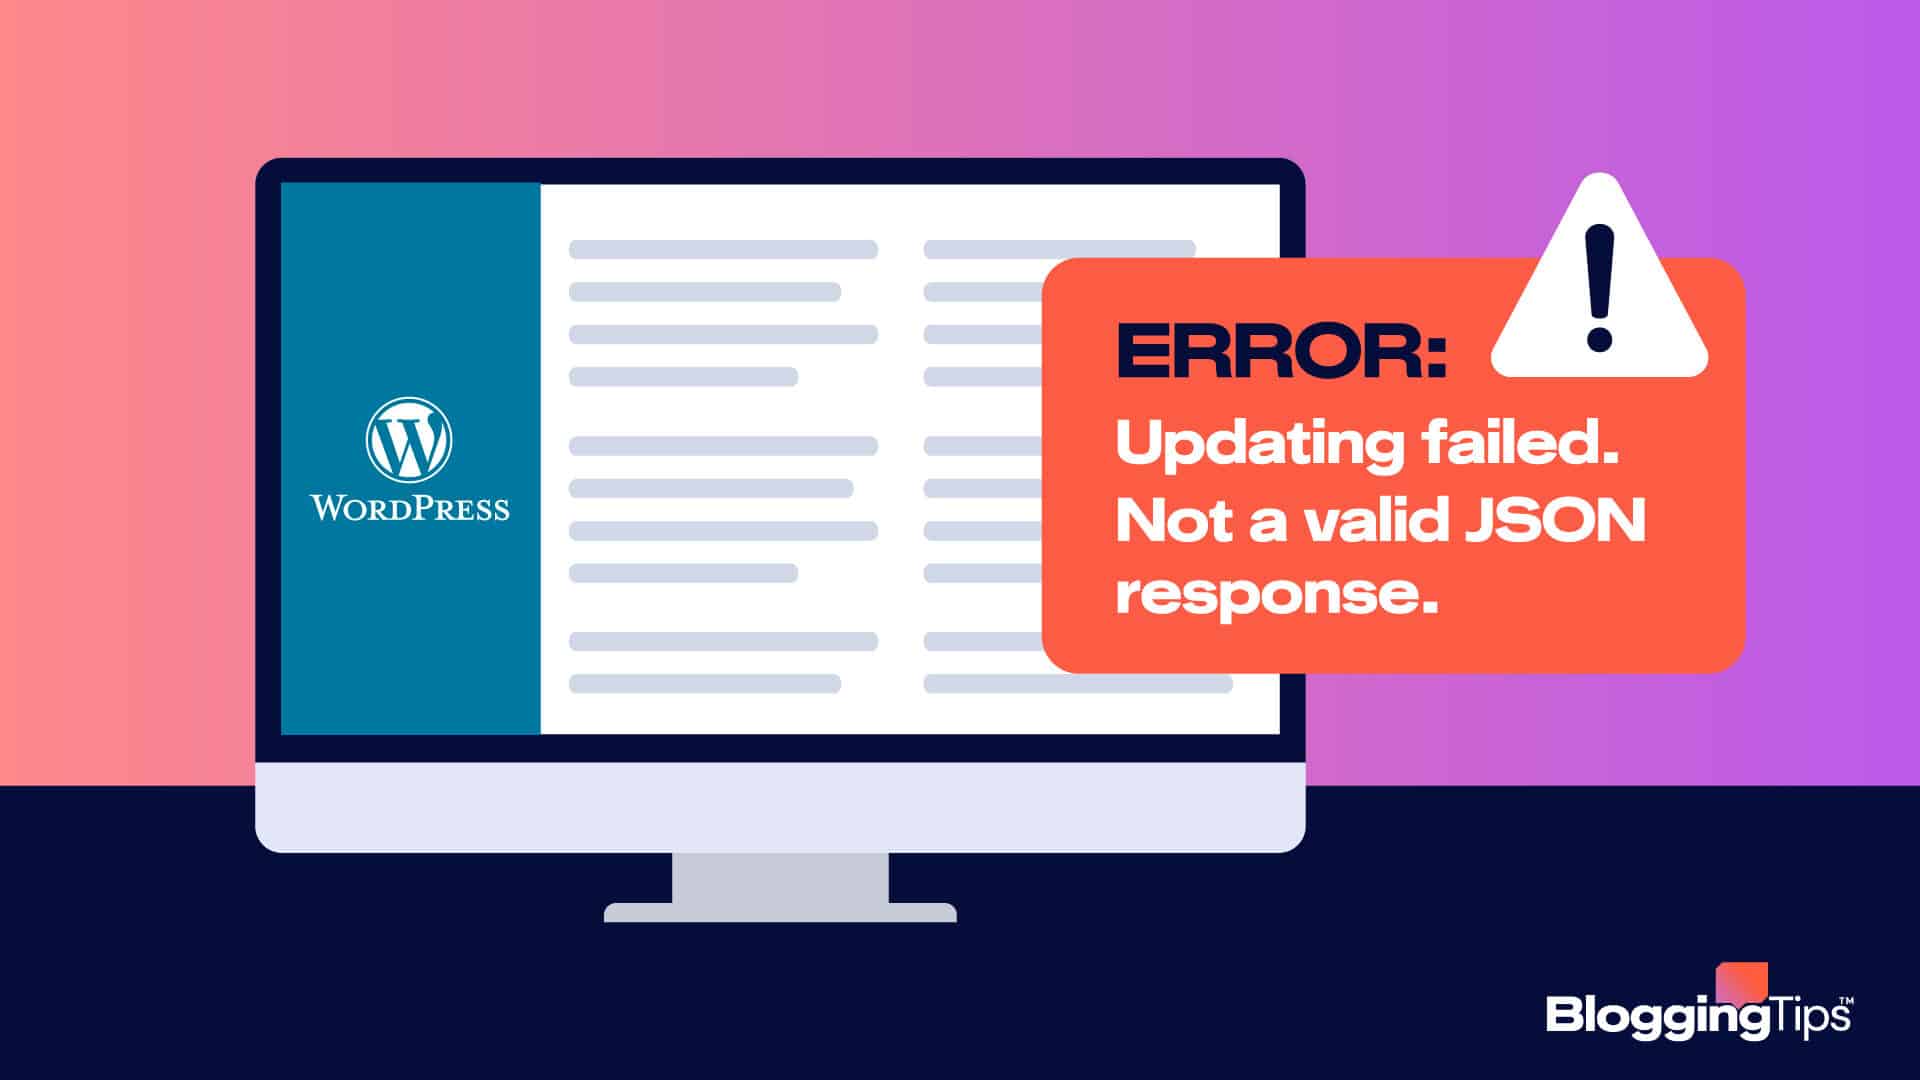 vector graphic showing an illustration of the error 